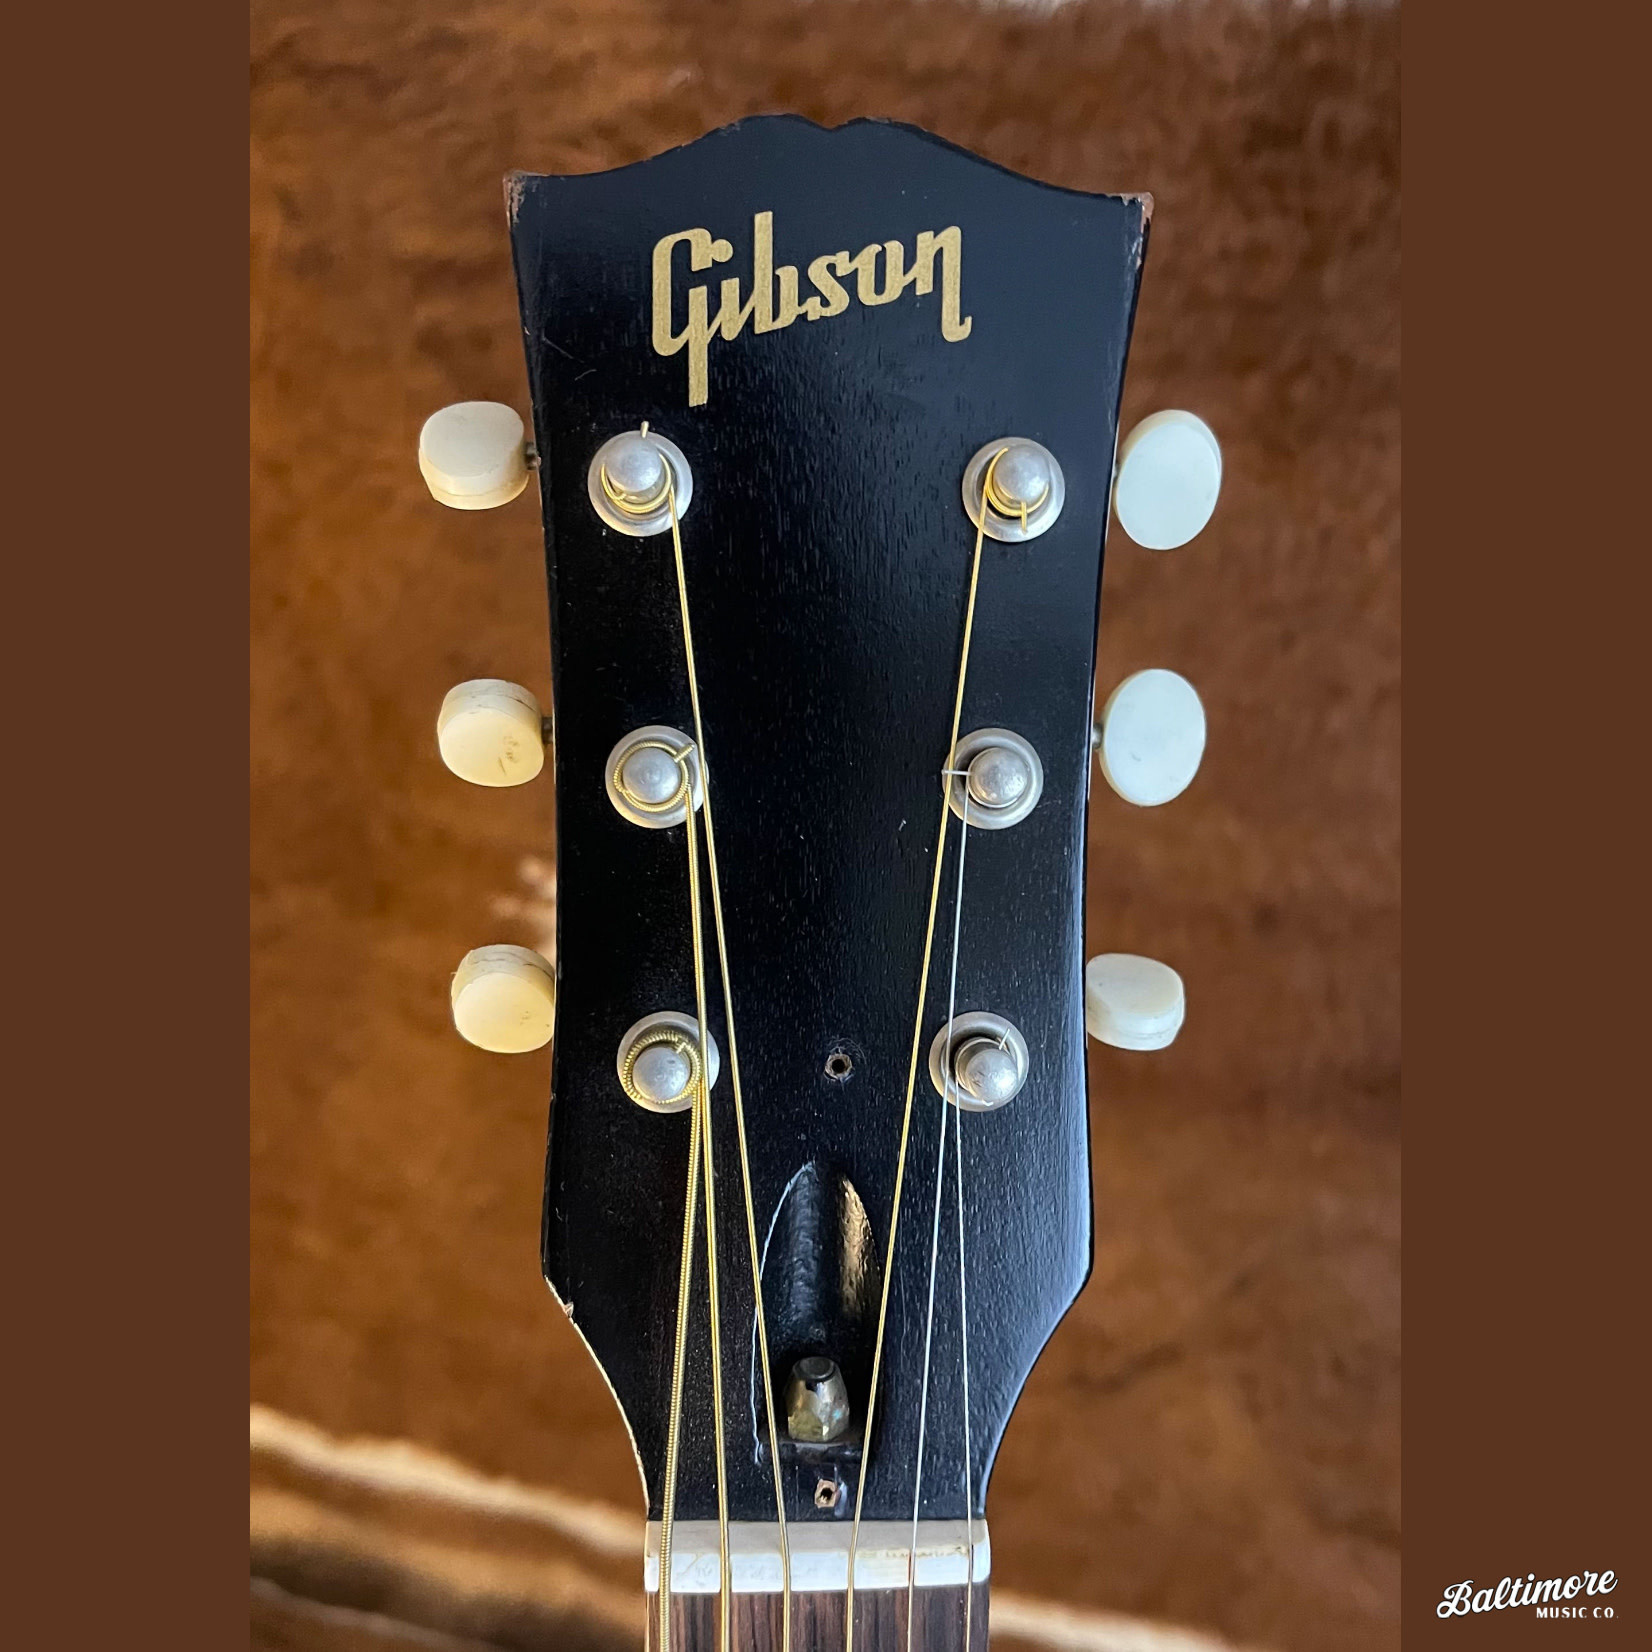 Gibson 1965 Gibson LG-0 Vintage Acoustic Guitar (Used)